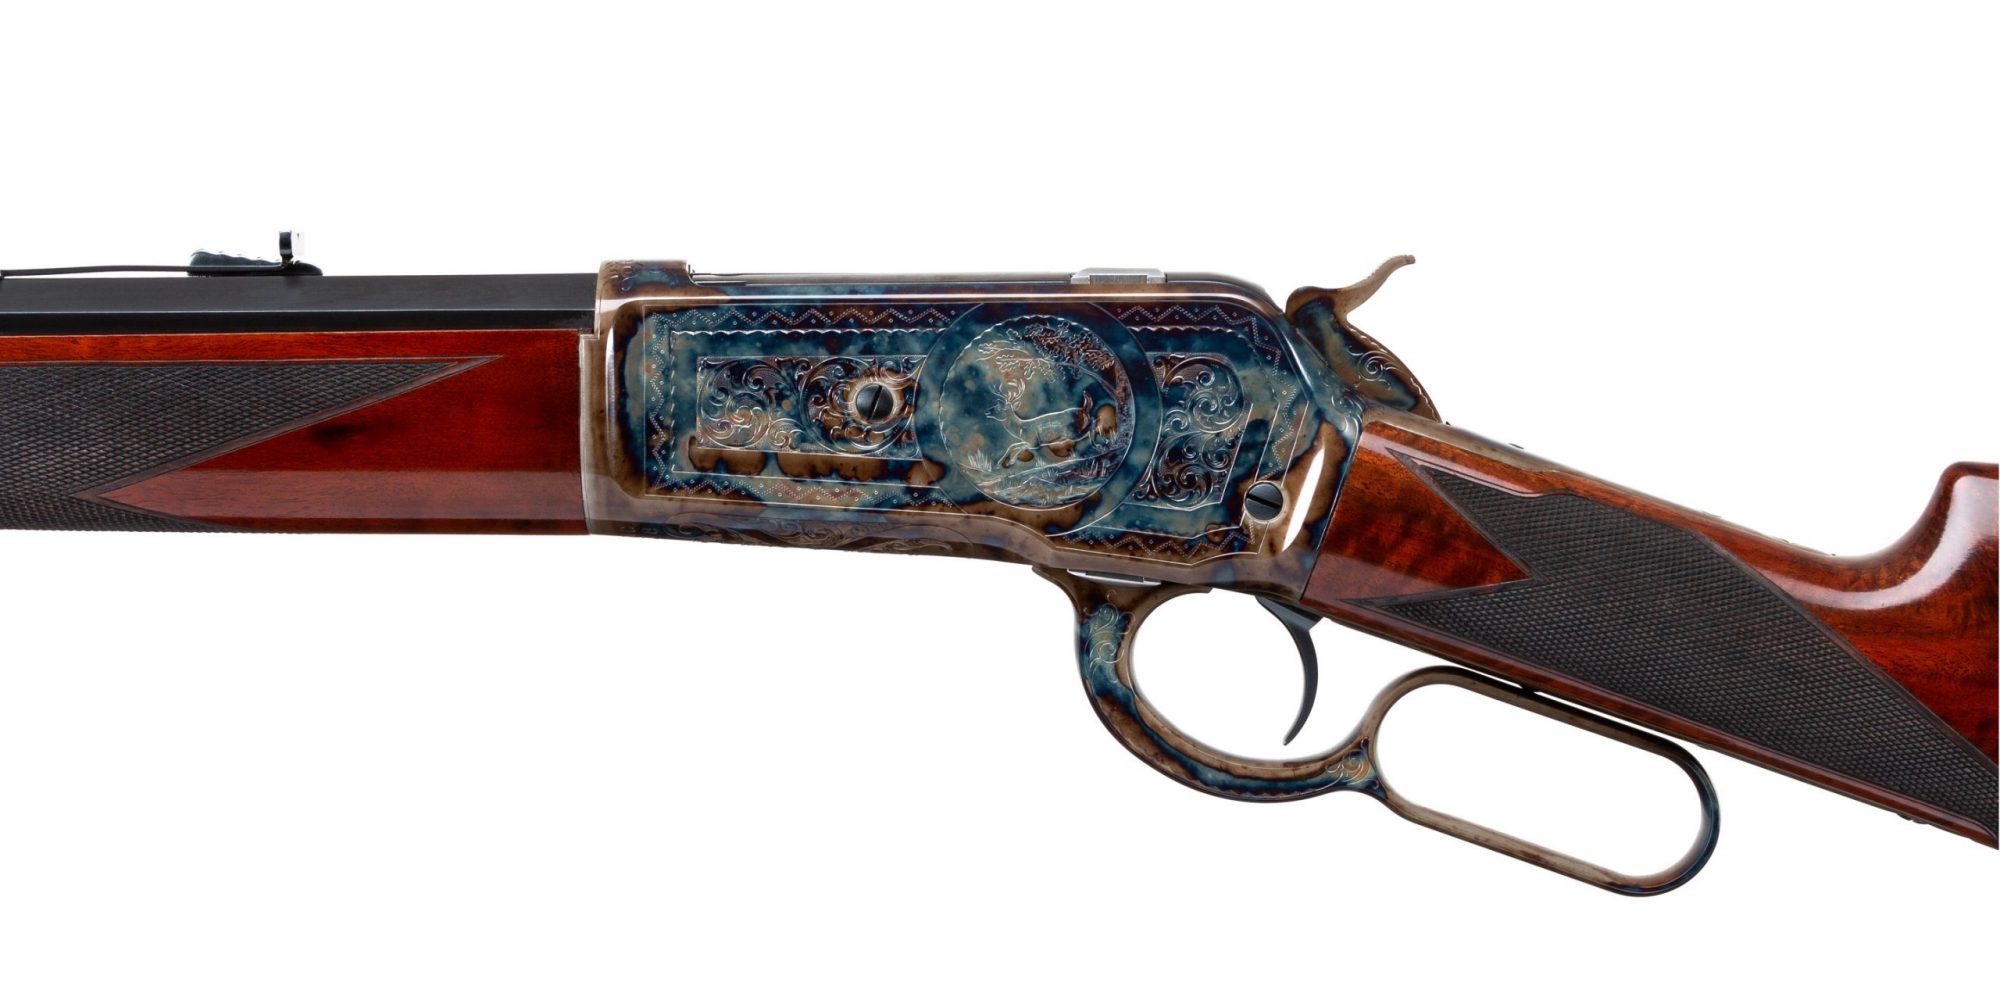 New build Turnbull Model 1886 lever action rifle in 45-70 with color case hardened and engraved receiver